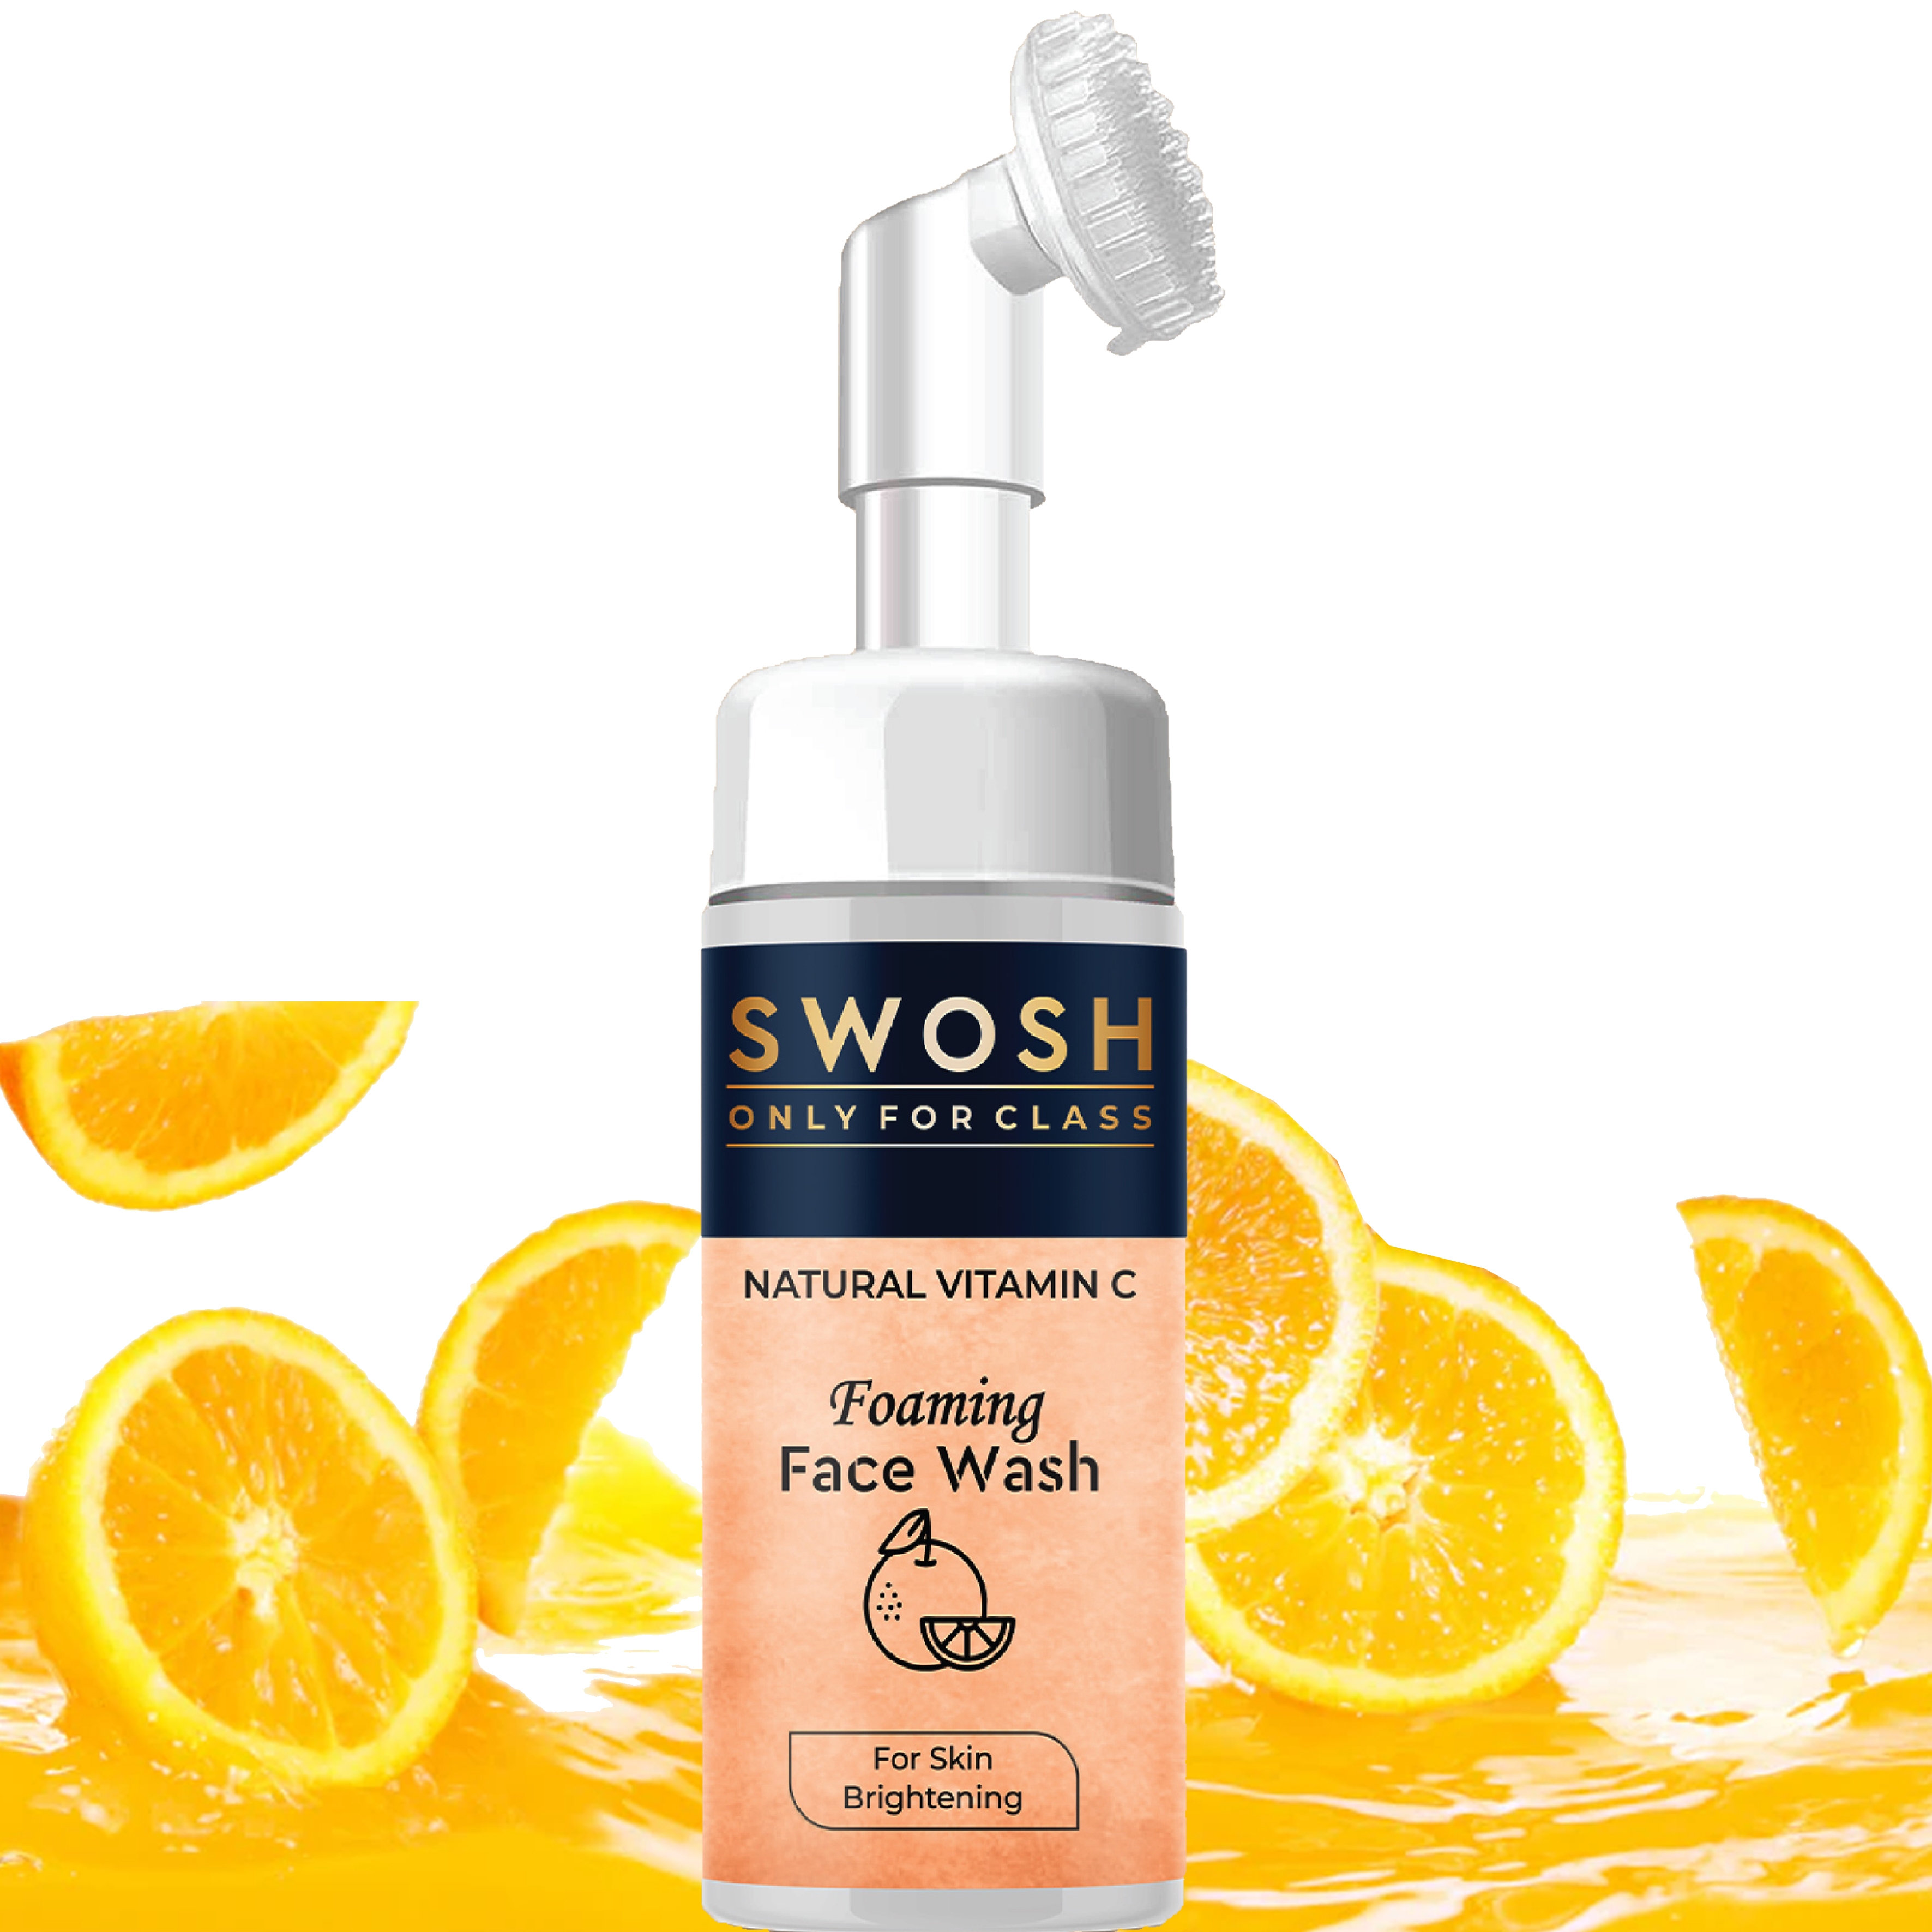 SWOSH | SWOSH Natural Vitamin C Foaming Face Wash For Pimple Prone & Oily Skin - No Parabens, Sulphate, Silicones & Colour (with Built-in Face Brush), 100 ml